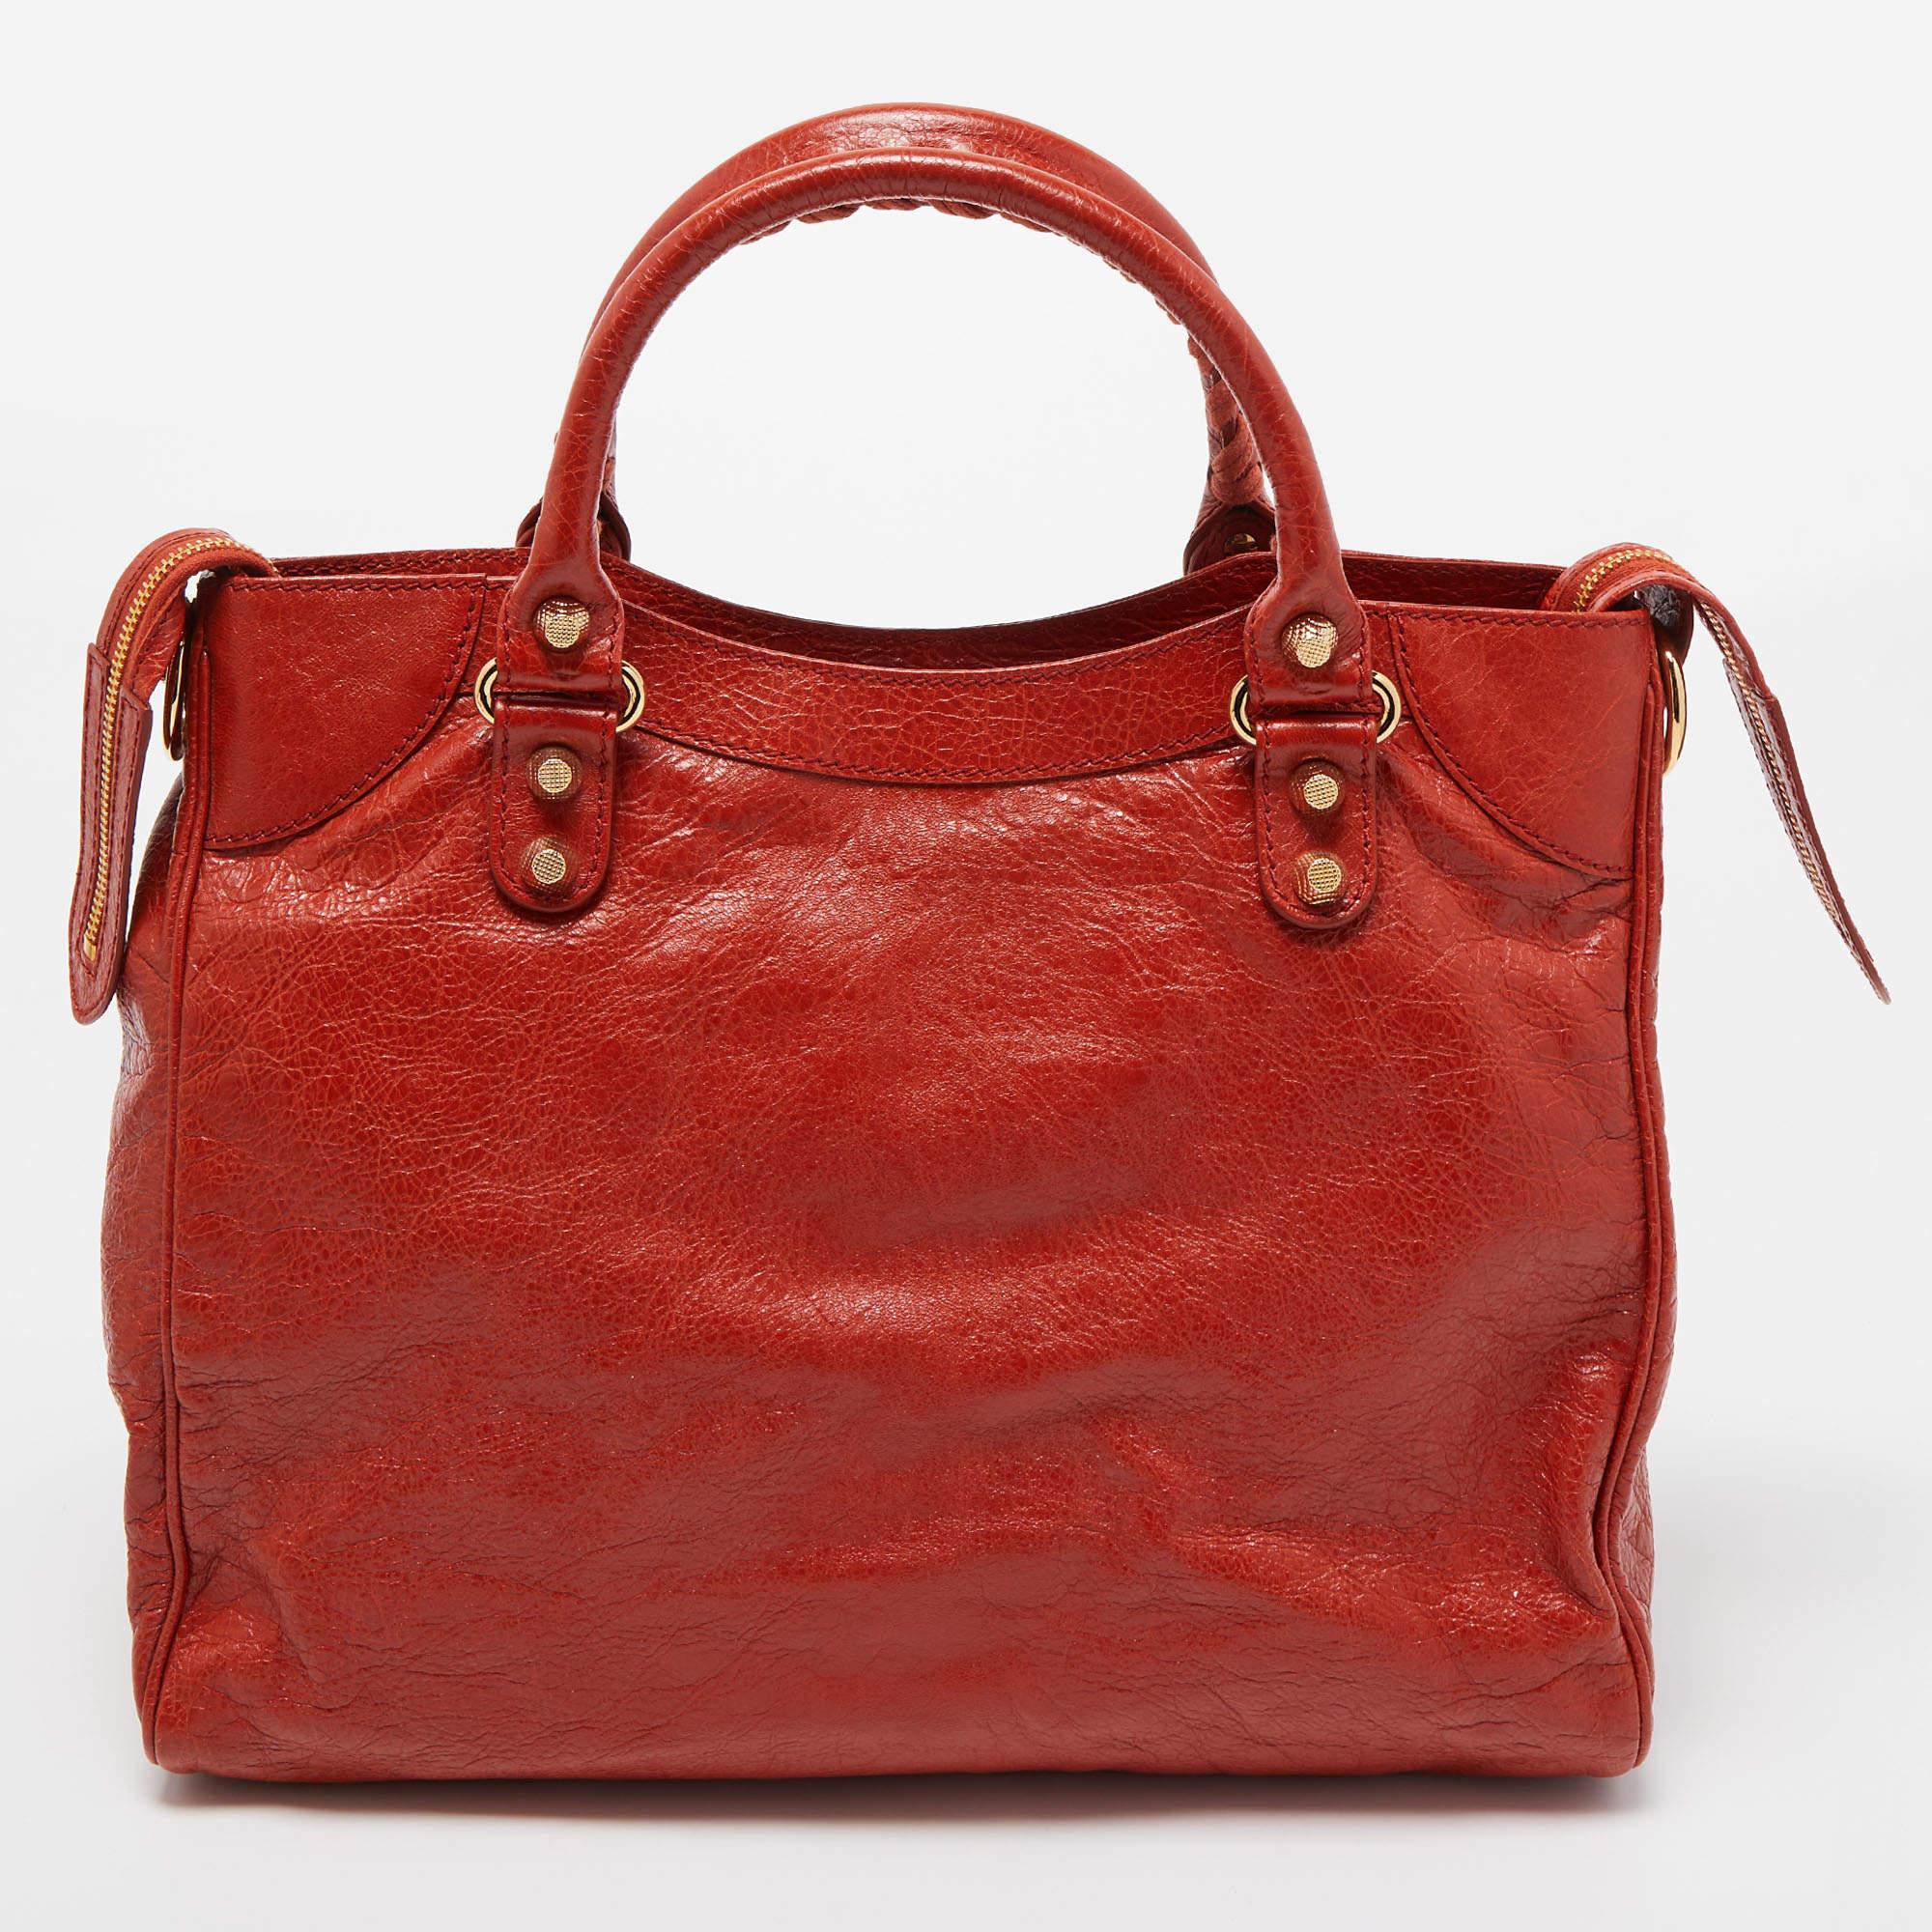 Balenciaga is known for its finely made products and the City bags are one of them. Effortless and stylish, this leather bag will be your go-to for multiple occasions. It has the signature details of buckles, studs, and the front zipper. Two top